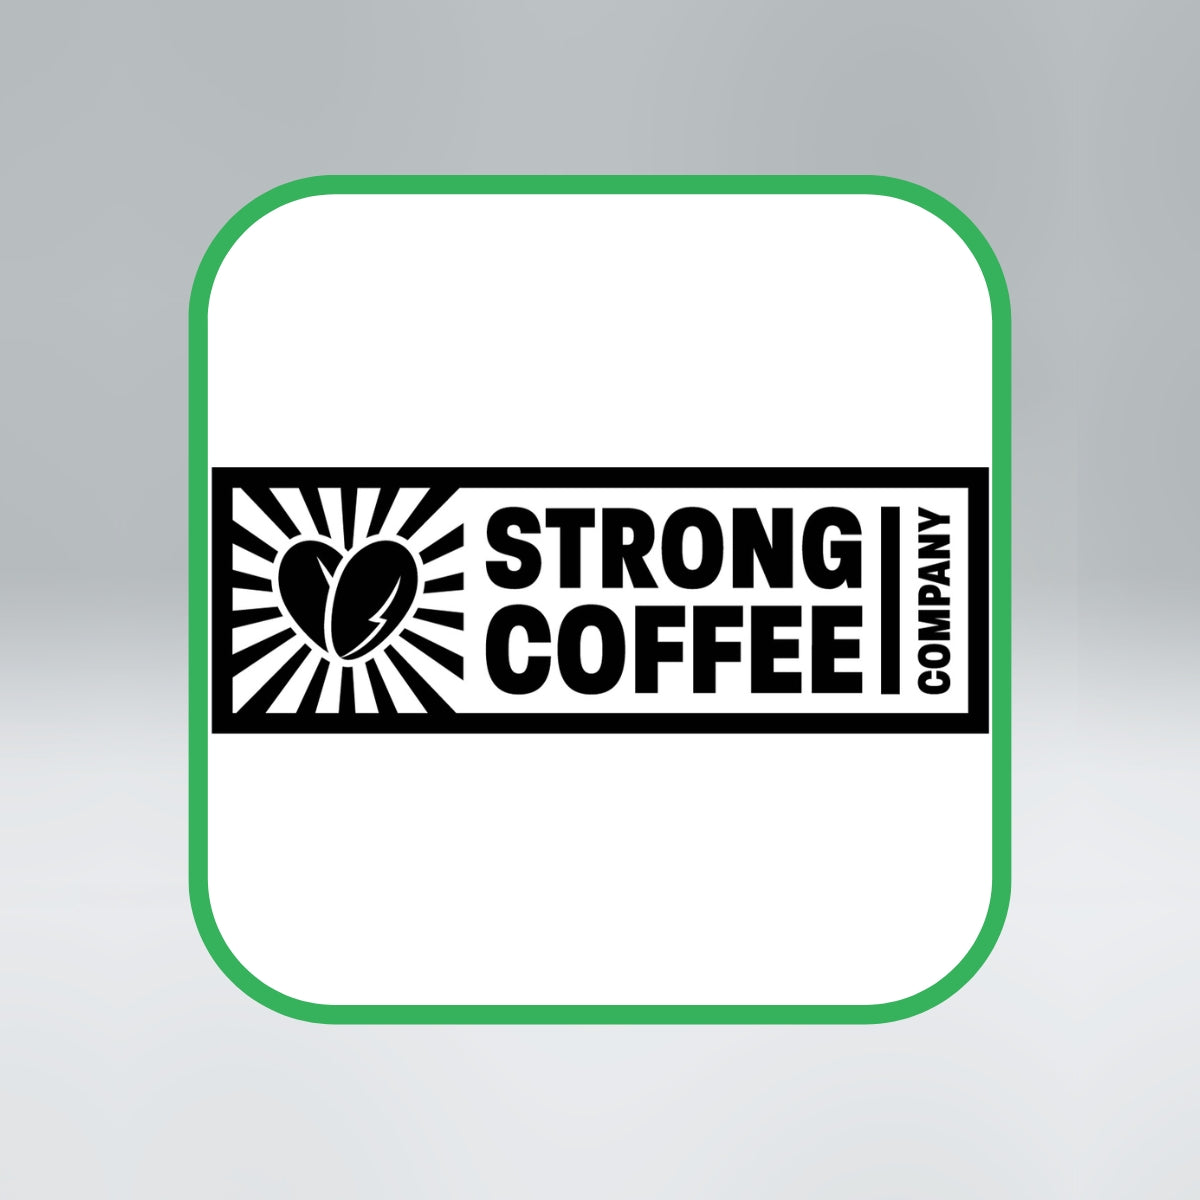 Strong Coffee Compagny 